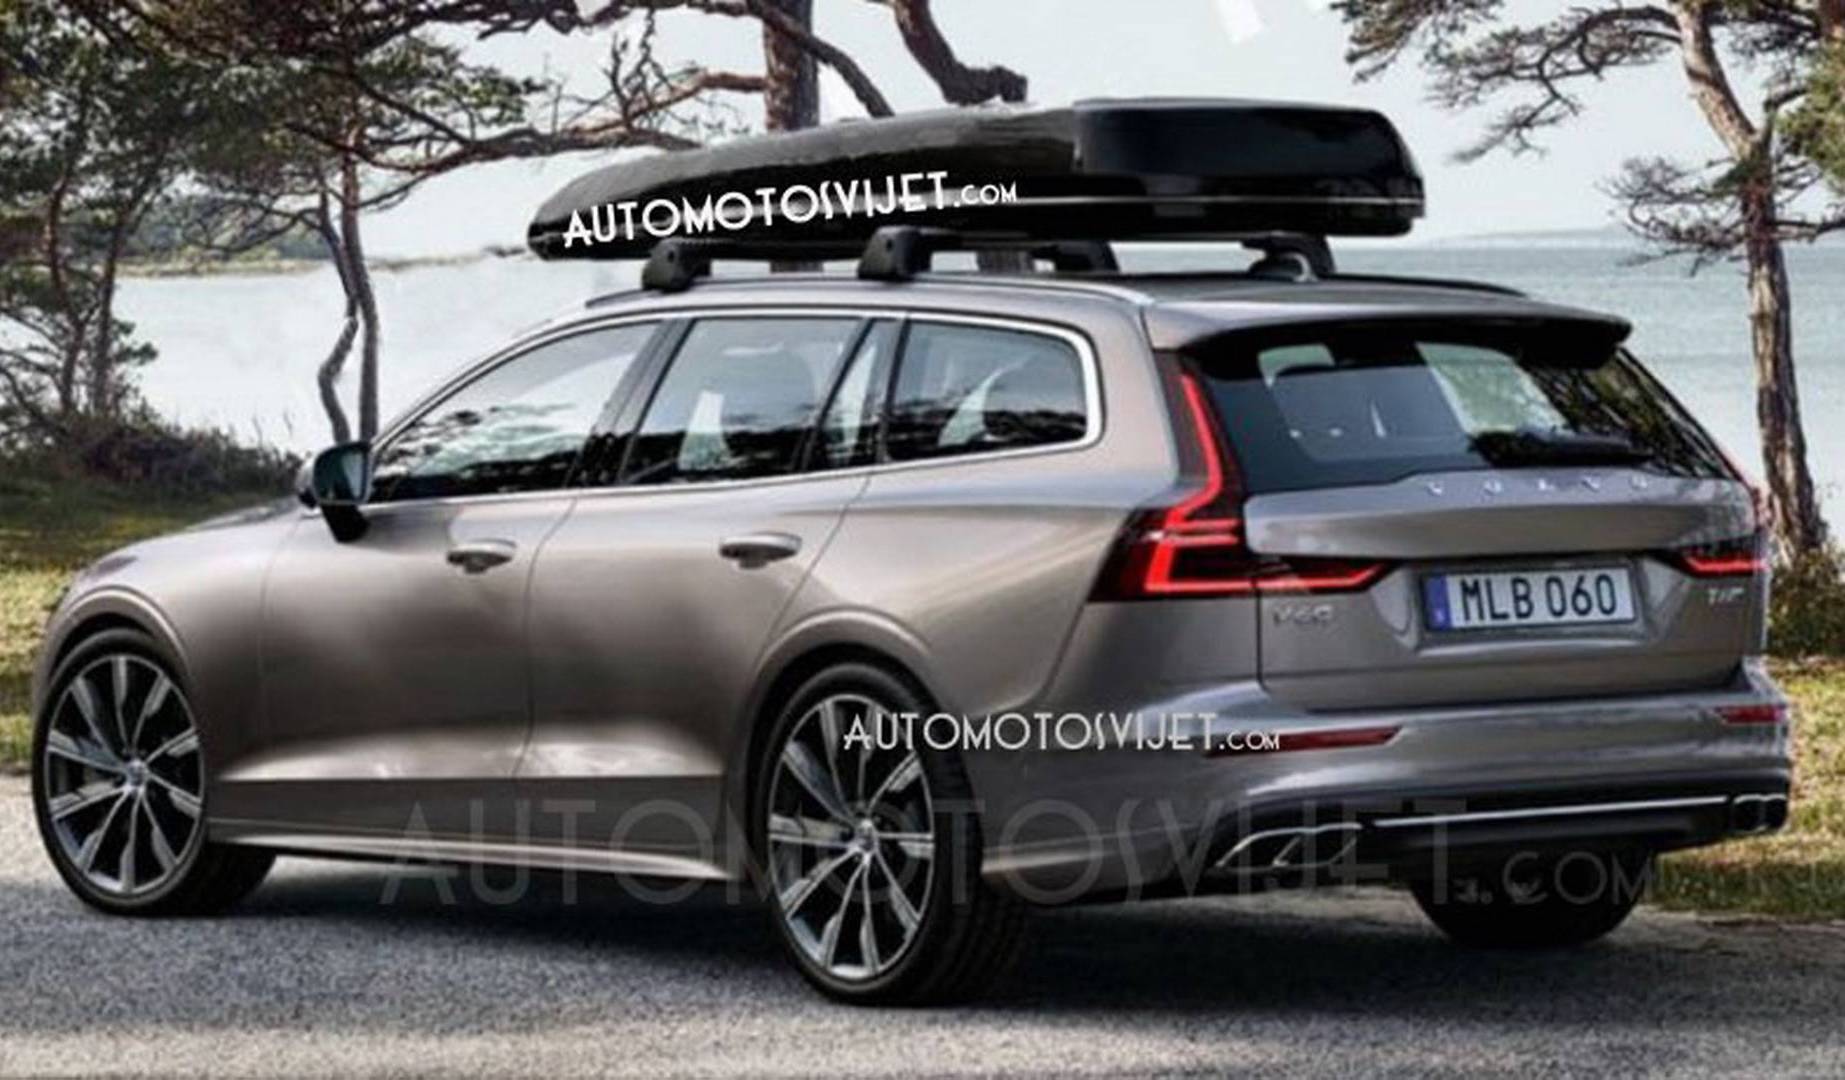 2019 Volvo V60 officially previewed, leaked images show design (video)